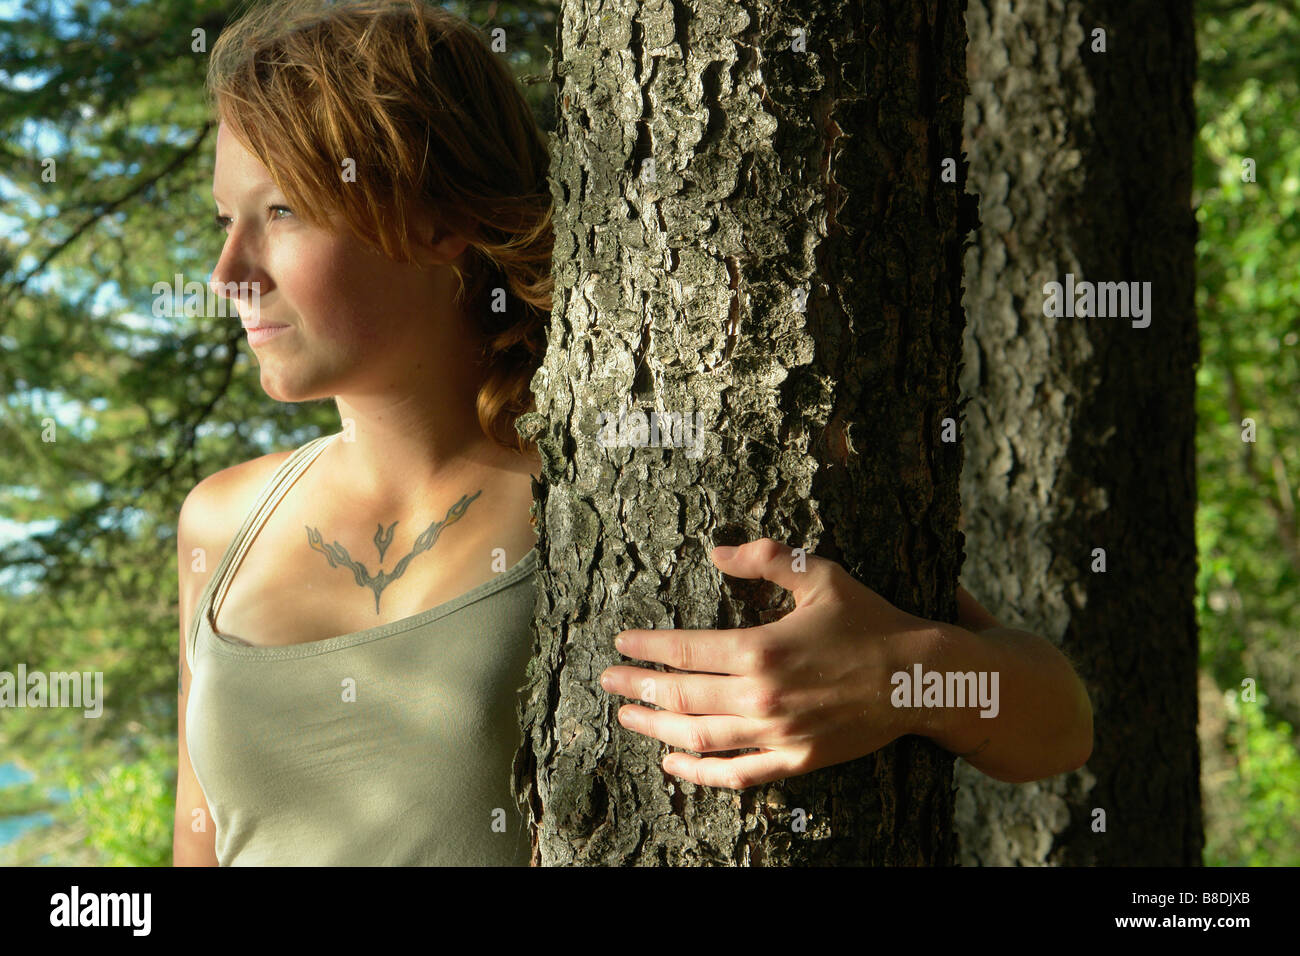 Woman with arm around tree, in a grove of trees, Riding Mountain National Park, Manitoba, Canada Stock Photo